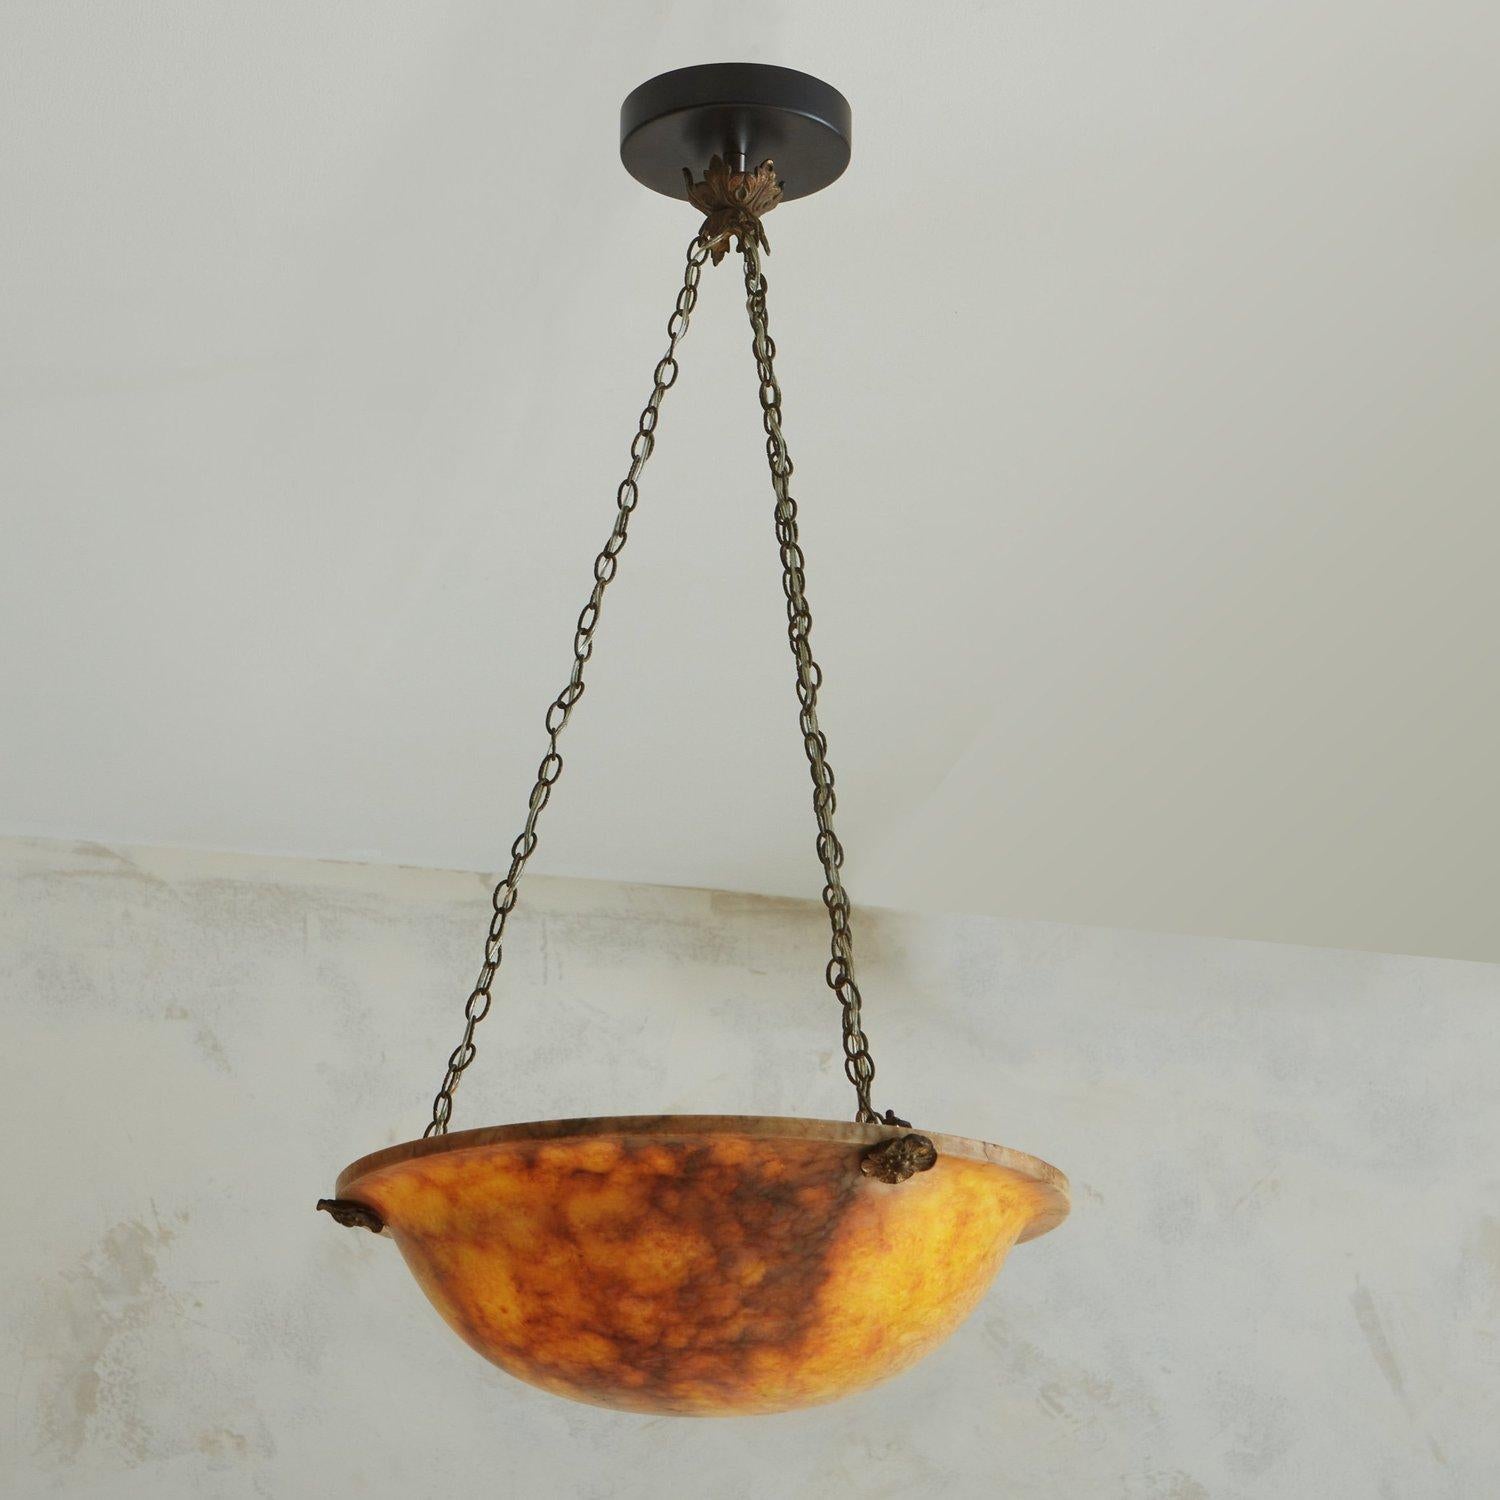 An elegant 1960s French pendant light featuring an alabaster shade in a lovely orange hue with gray and cream veining. The shade is suspended from three bronze chains, which attach to the dome and canopy with bronze rosette hardware. This pendant